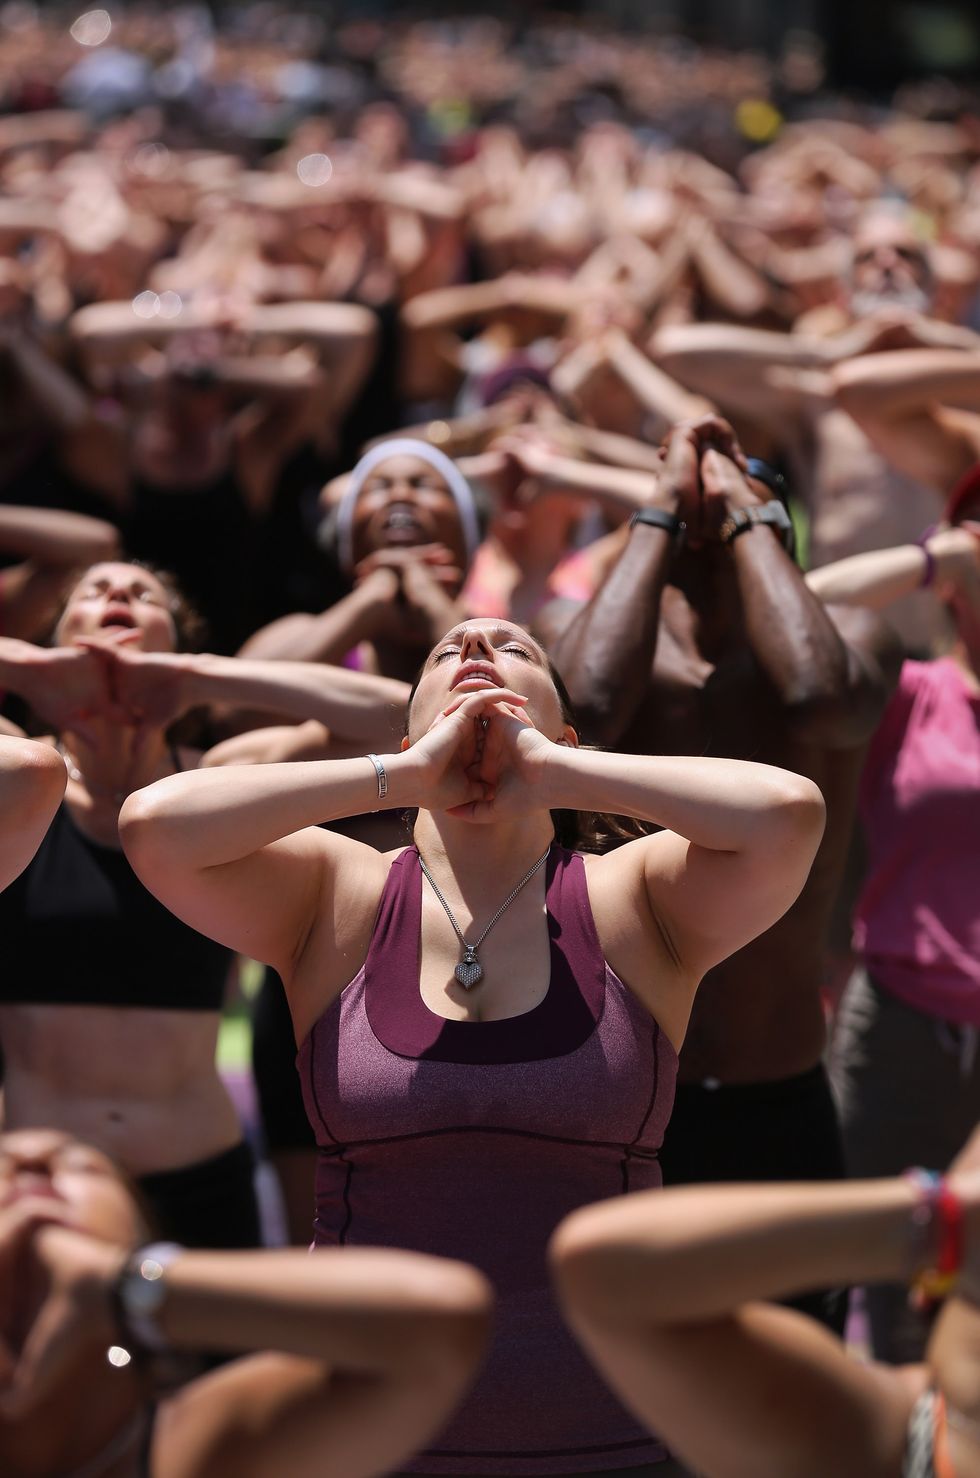 bikram yoga practicers at the annual mind over madness event in times square on june 20 2012